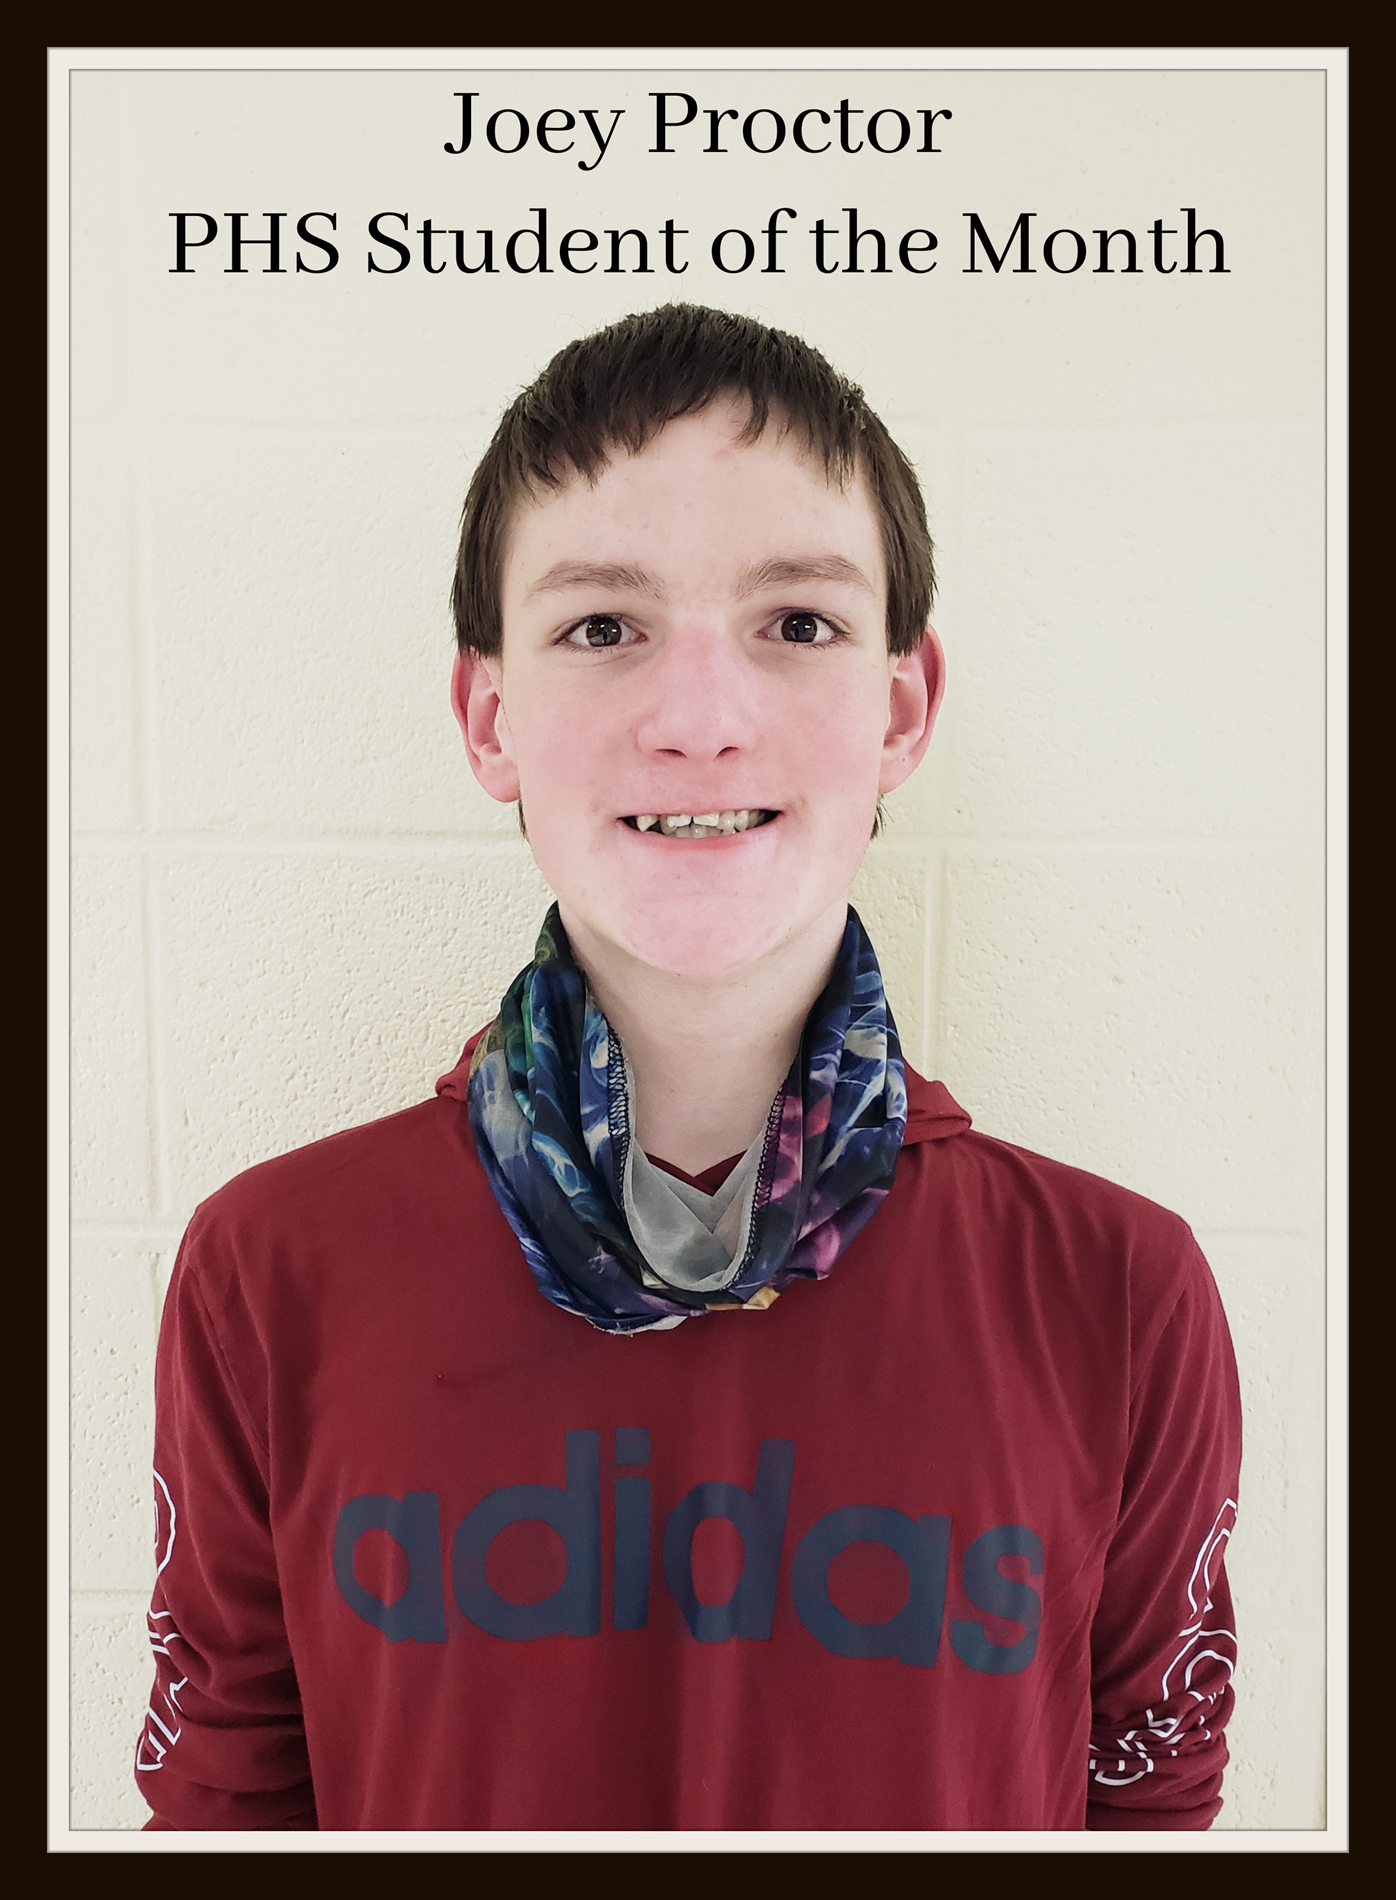 Student of the month image